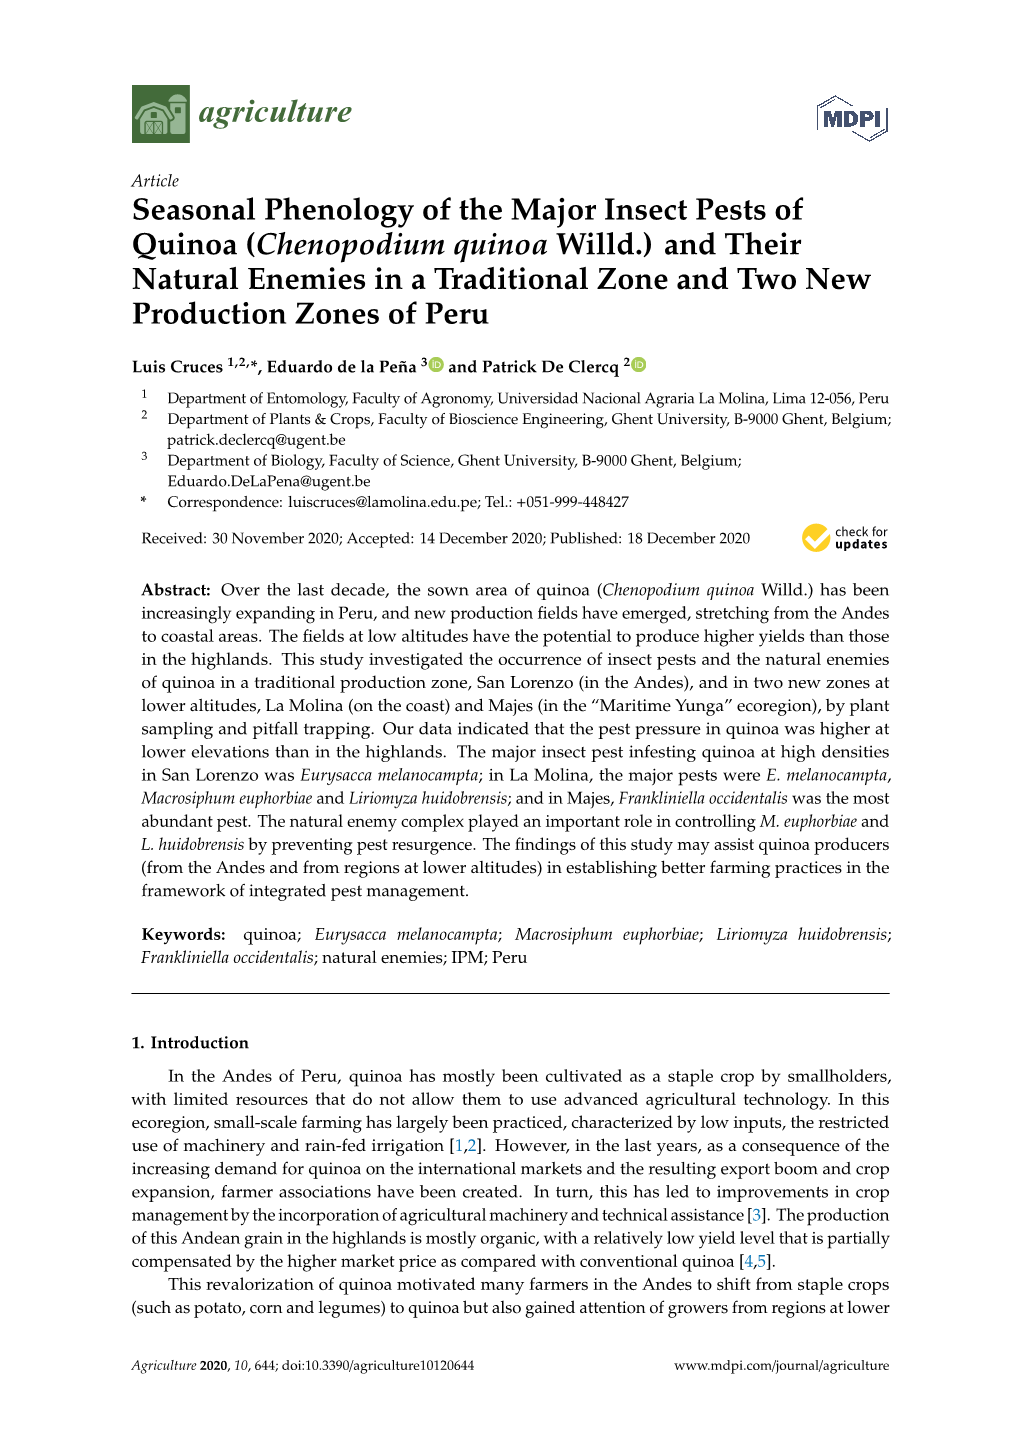 Seasonal Phenology of the Major Insect Pests of Quinoa